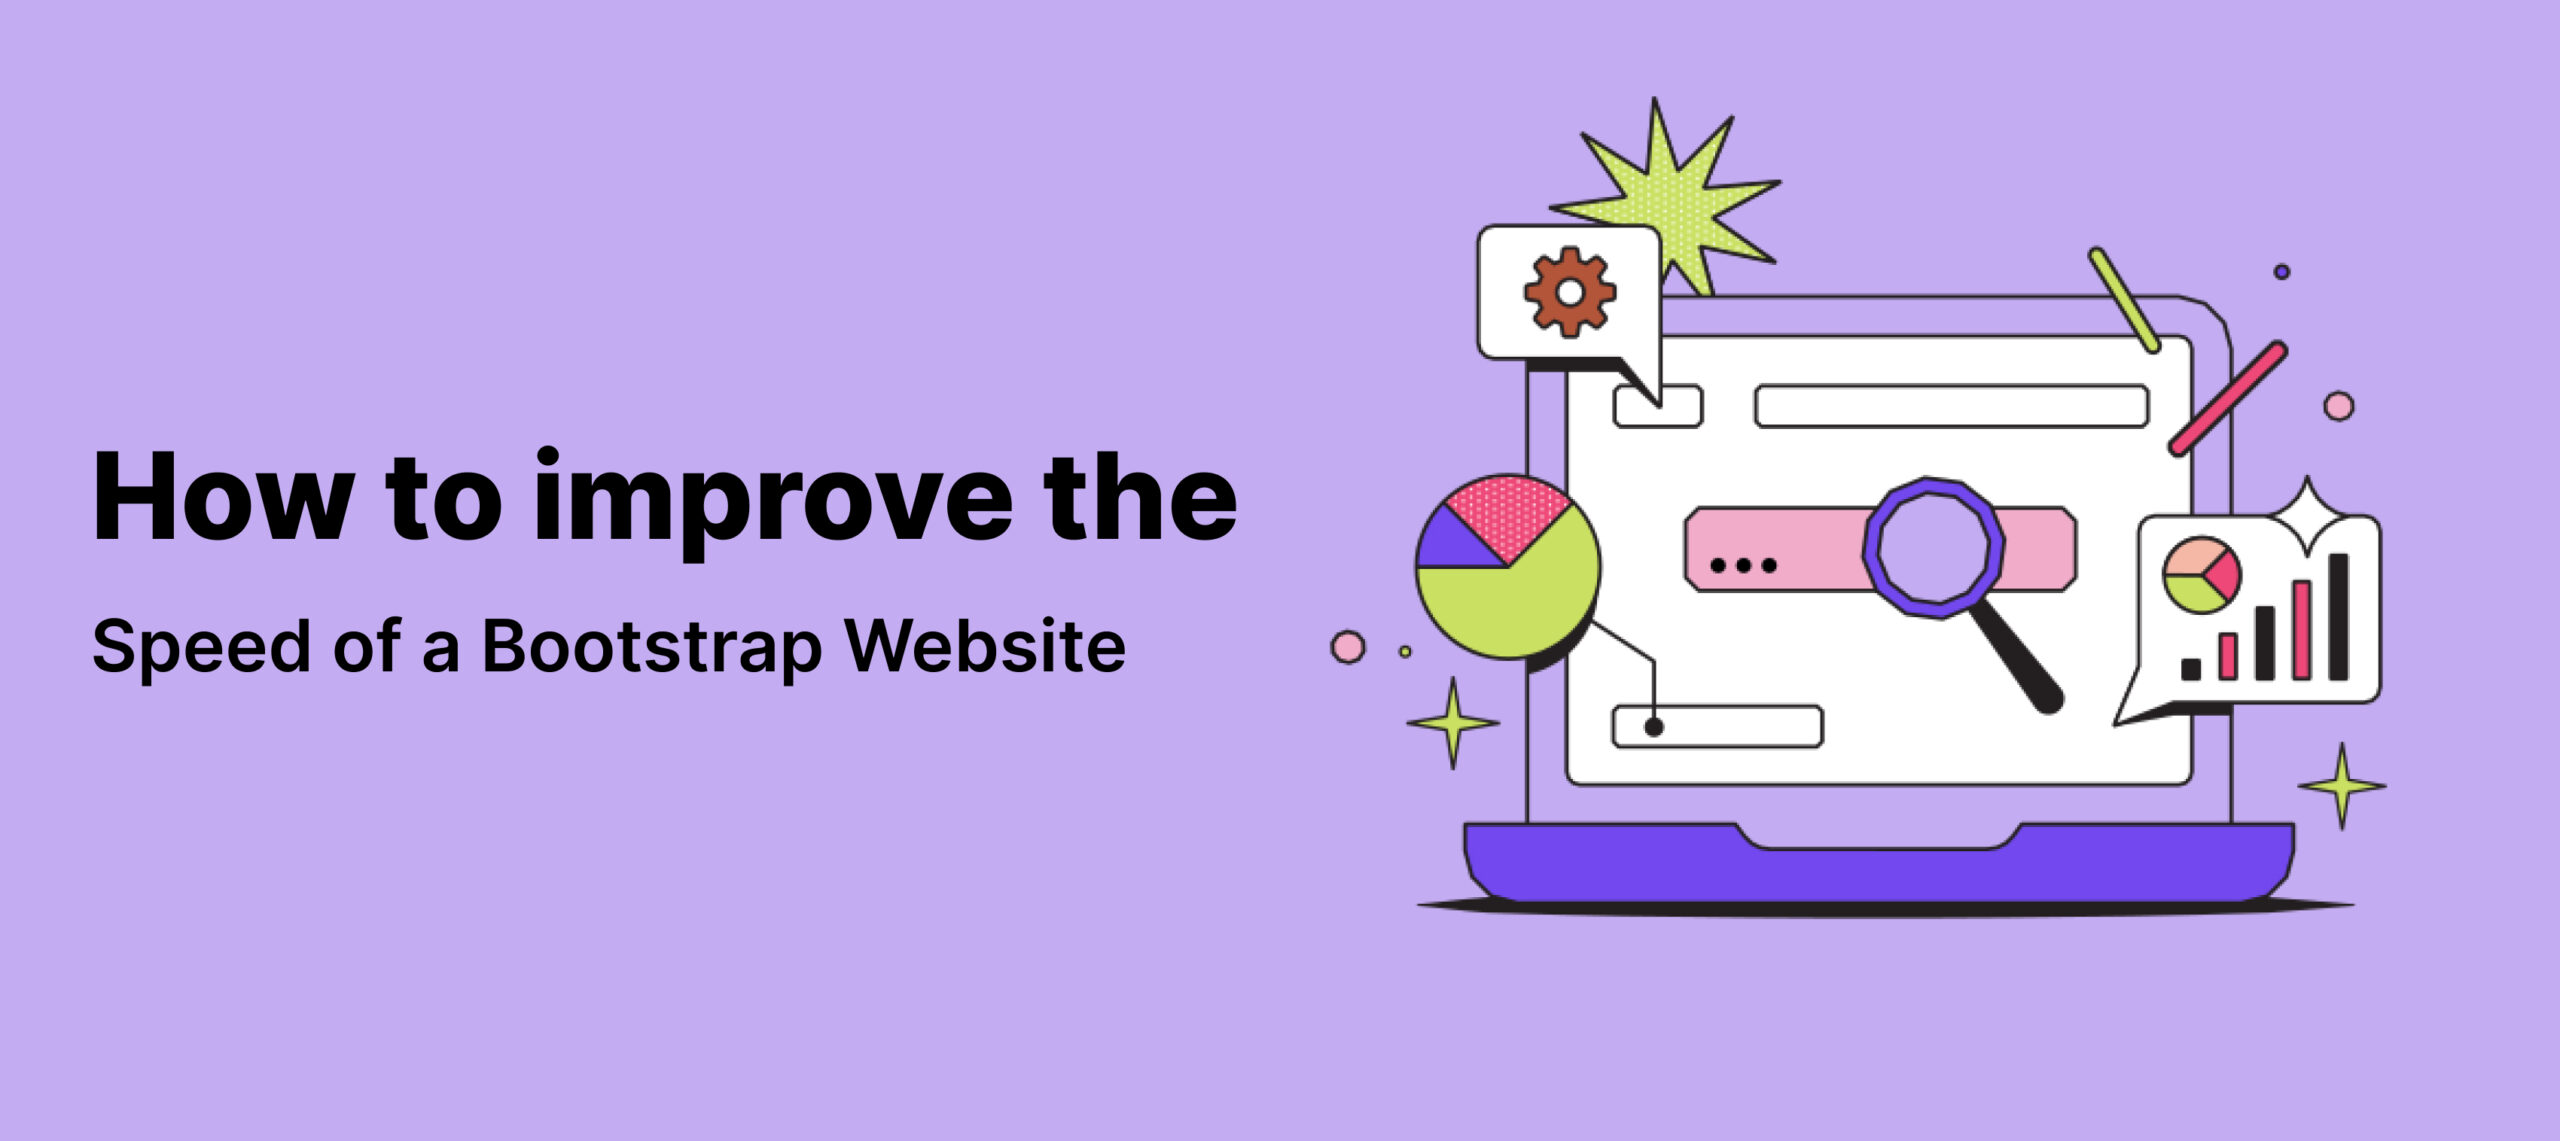  How to improve the Speed of a Bootstrap Website